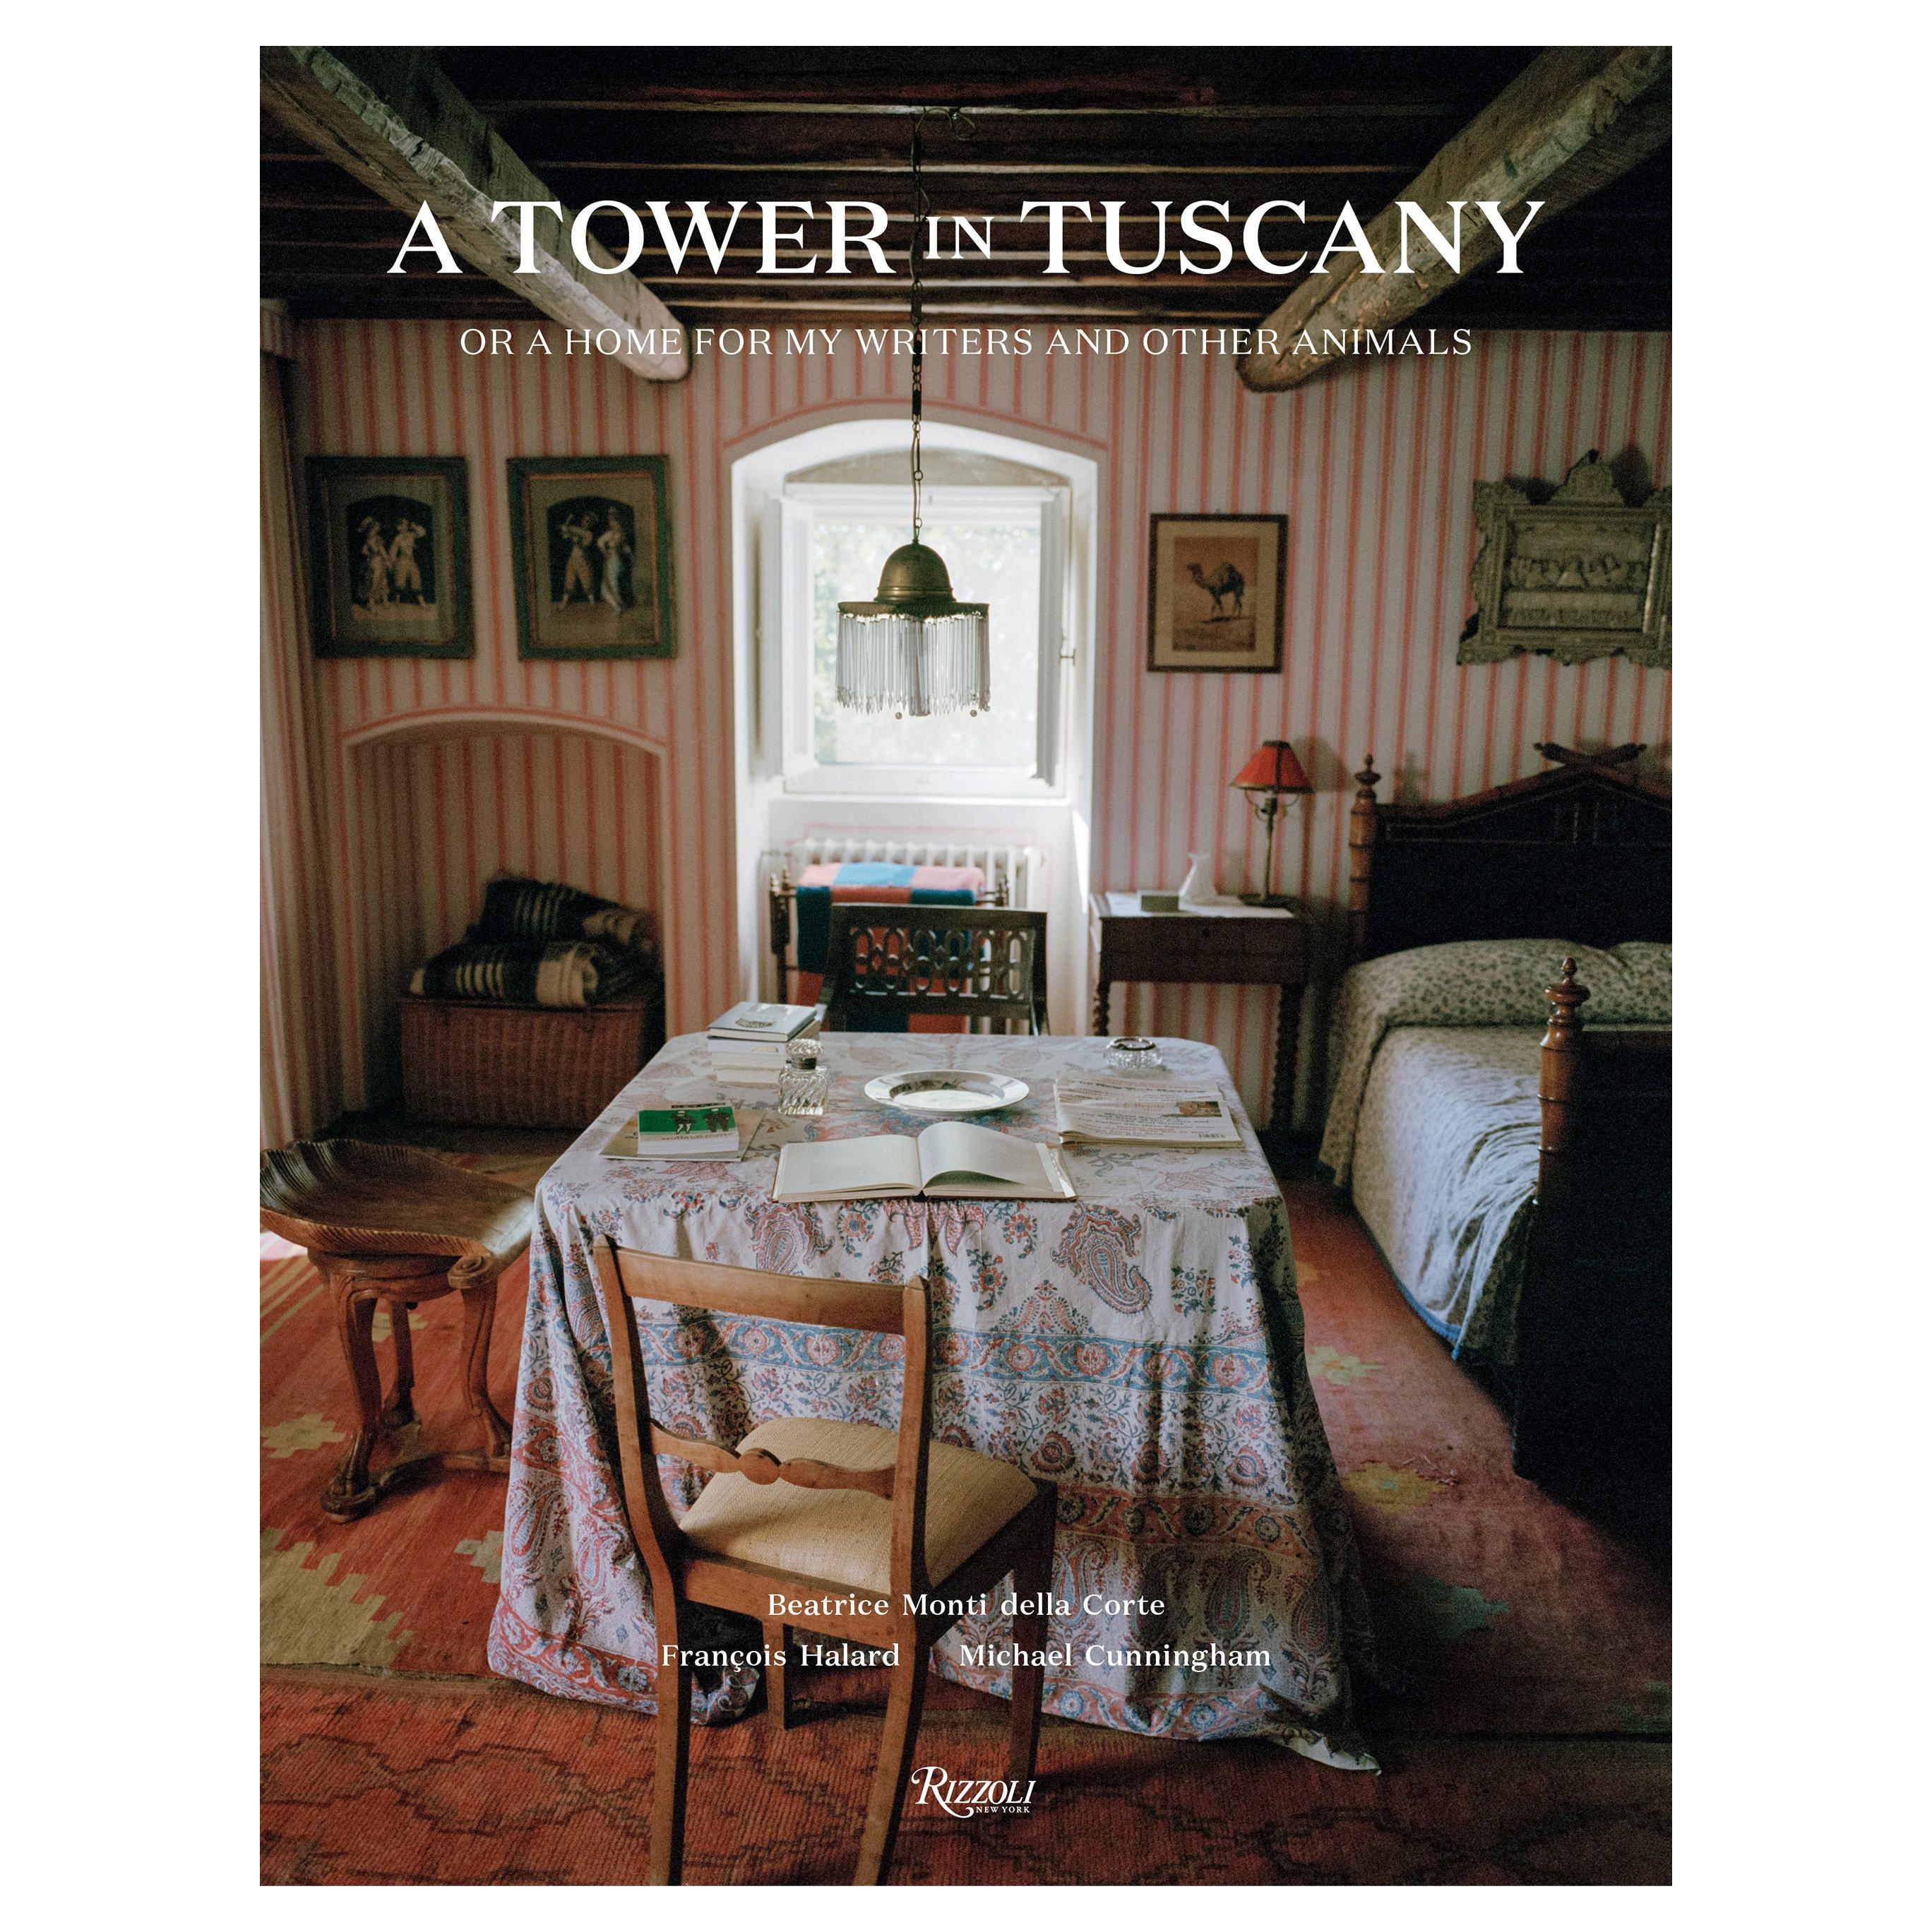 A Tower in Tuscany Or a Home for My Writers and Other Animals